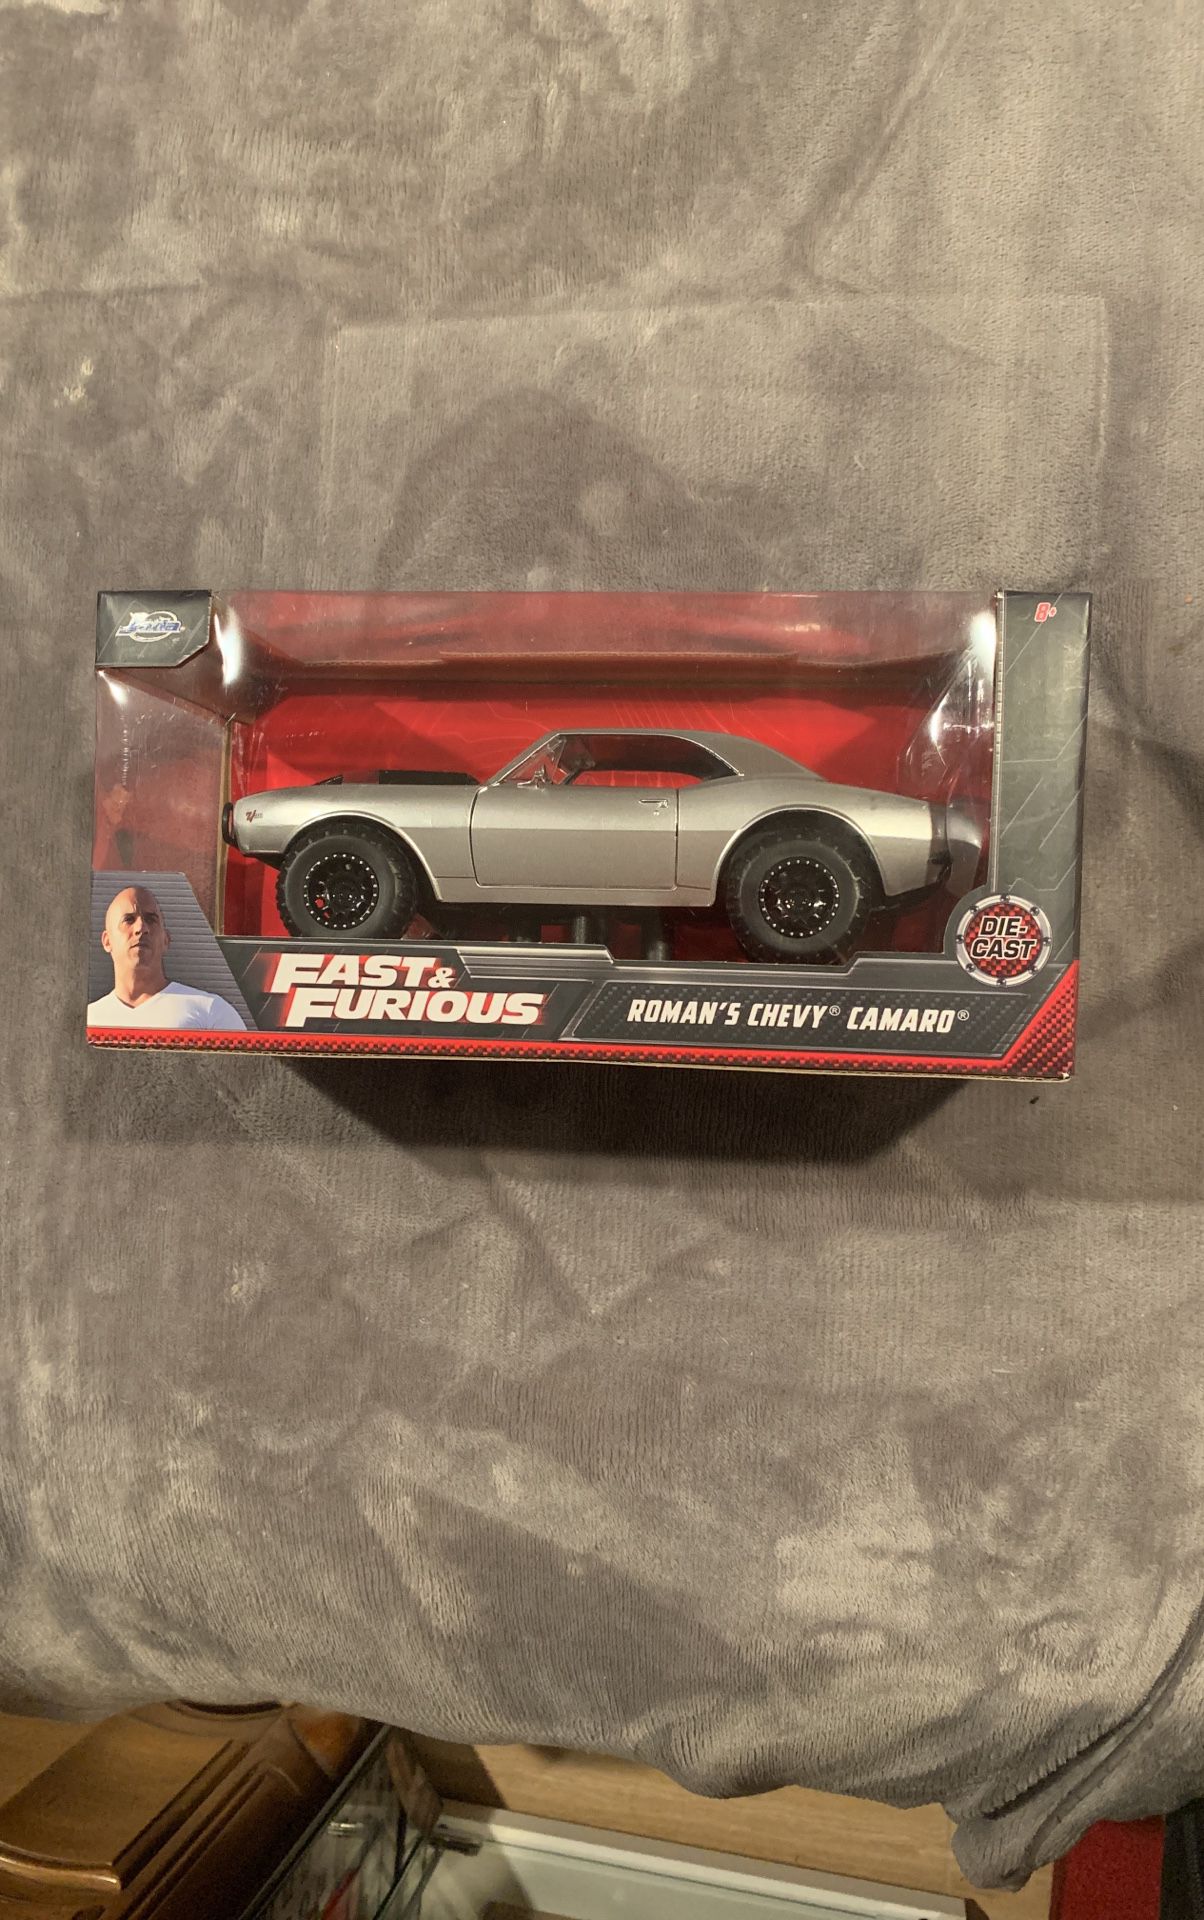 Fast And Furious Roman's Chevy Camaro Diecast